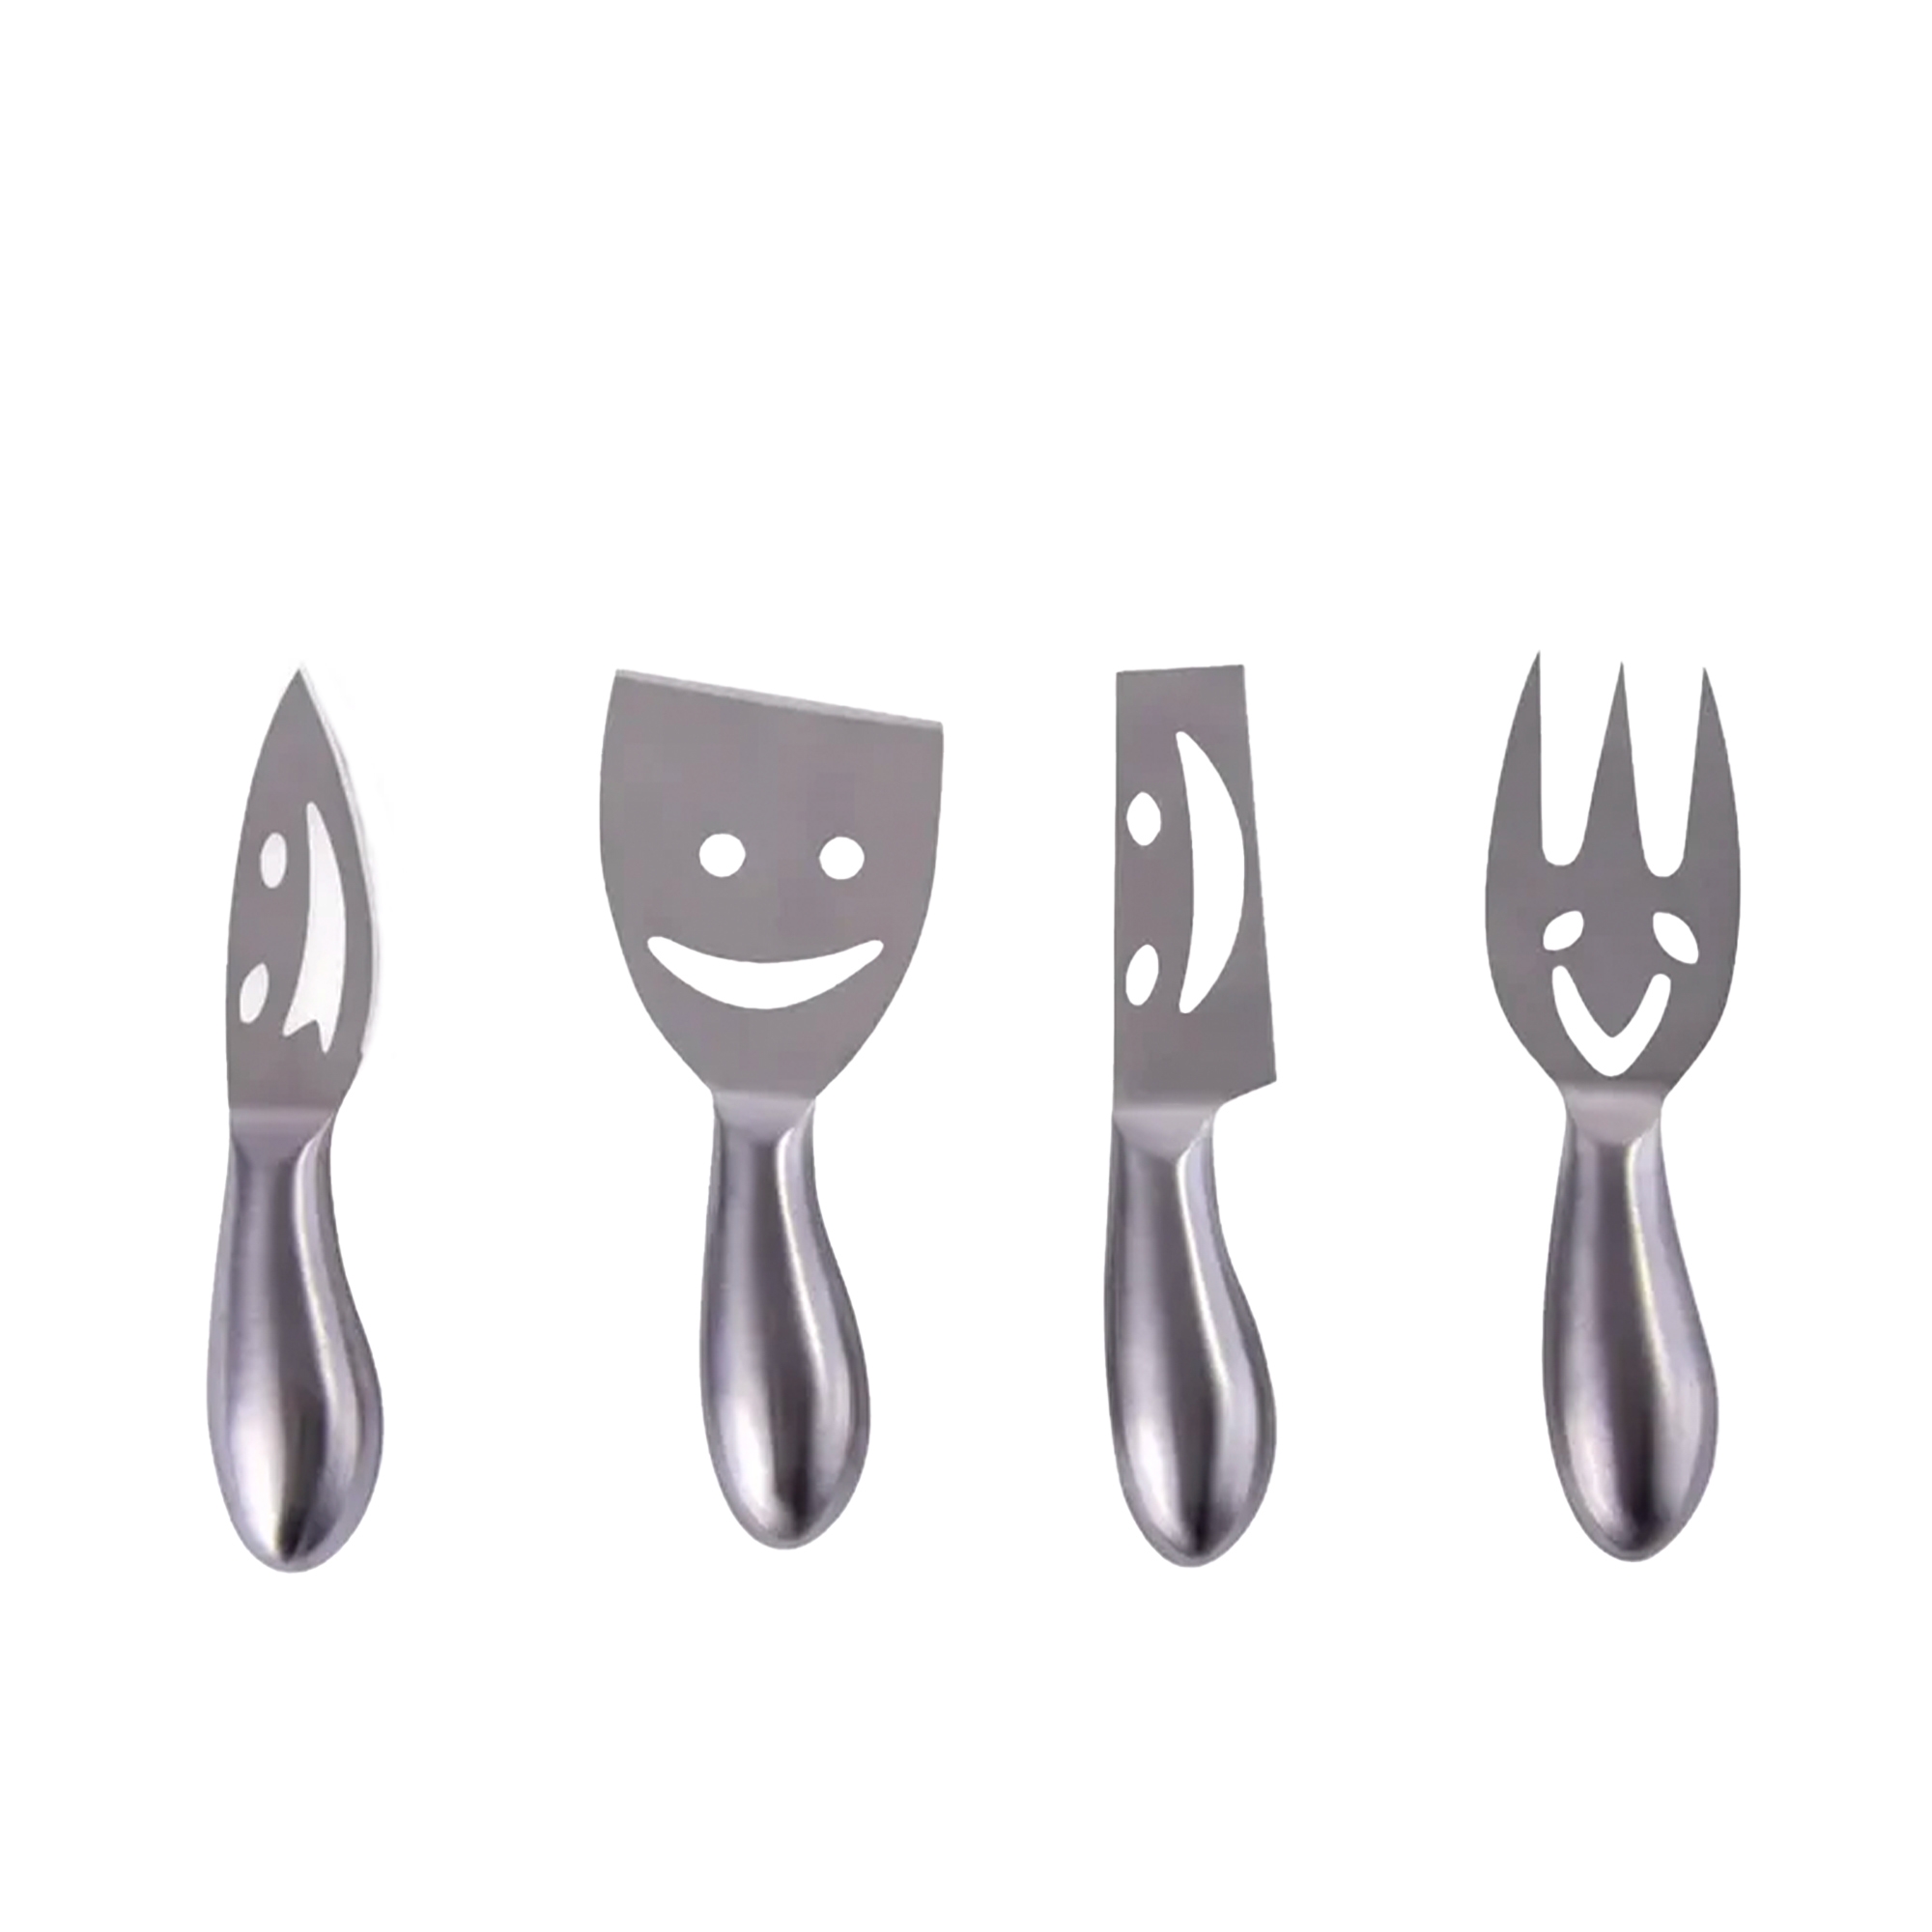 Clevinger Stainless Steel Merrivale Smiley Cheese Knife Set Set of 4 Image 1